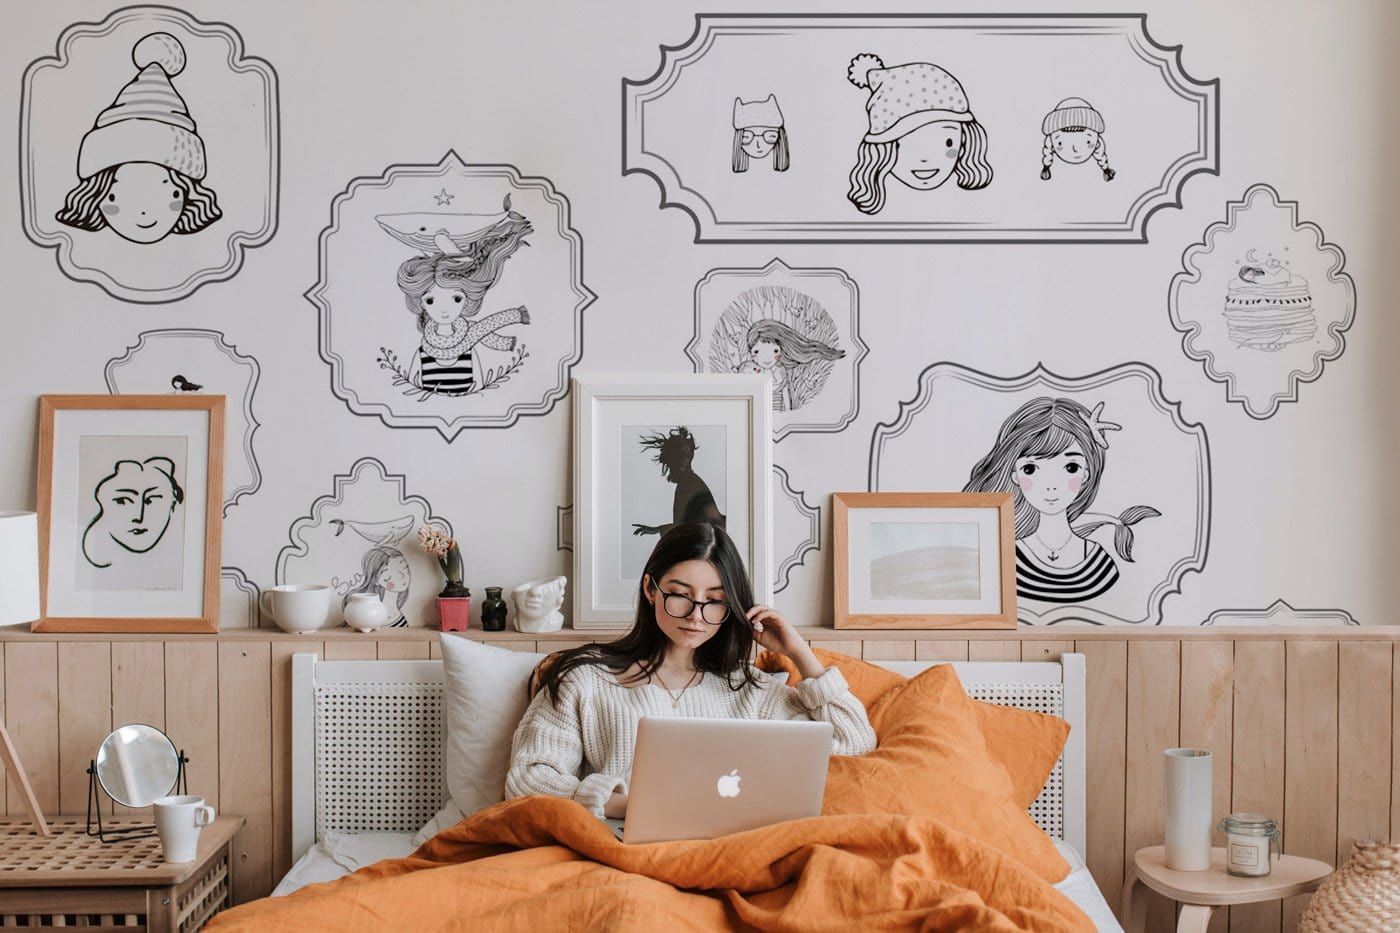 Wallpaper Mural for the Bedroom with Cute Girls Cartoons